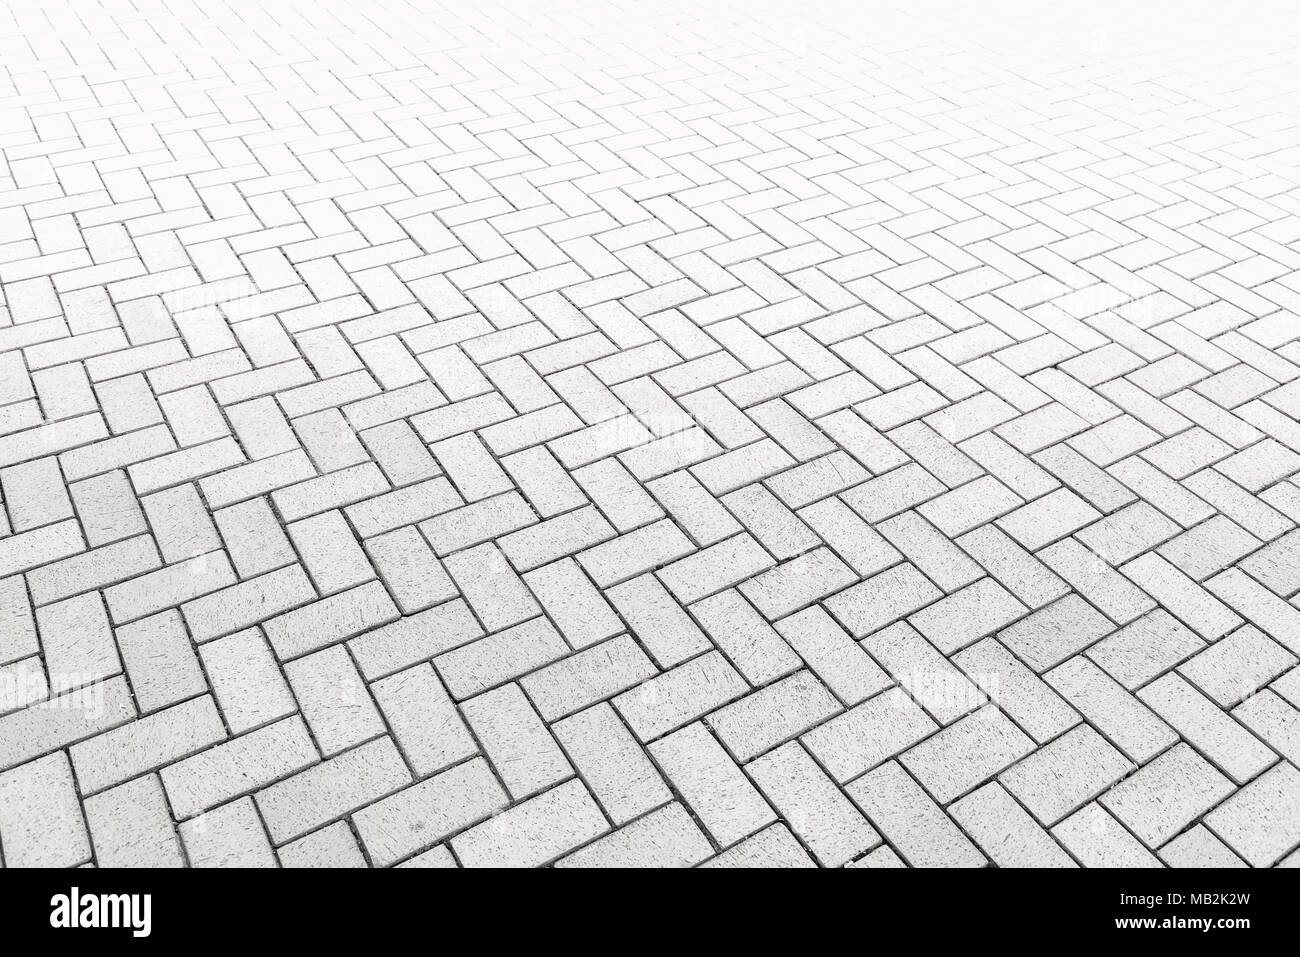 Pattern of walkway concrete block paving., Abstract background. Stock Photo